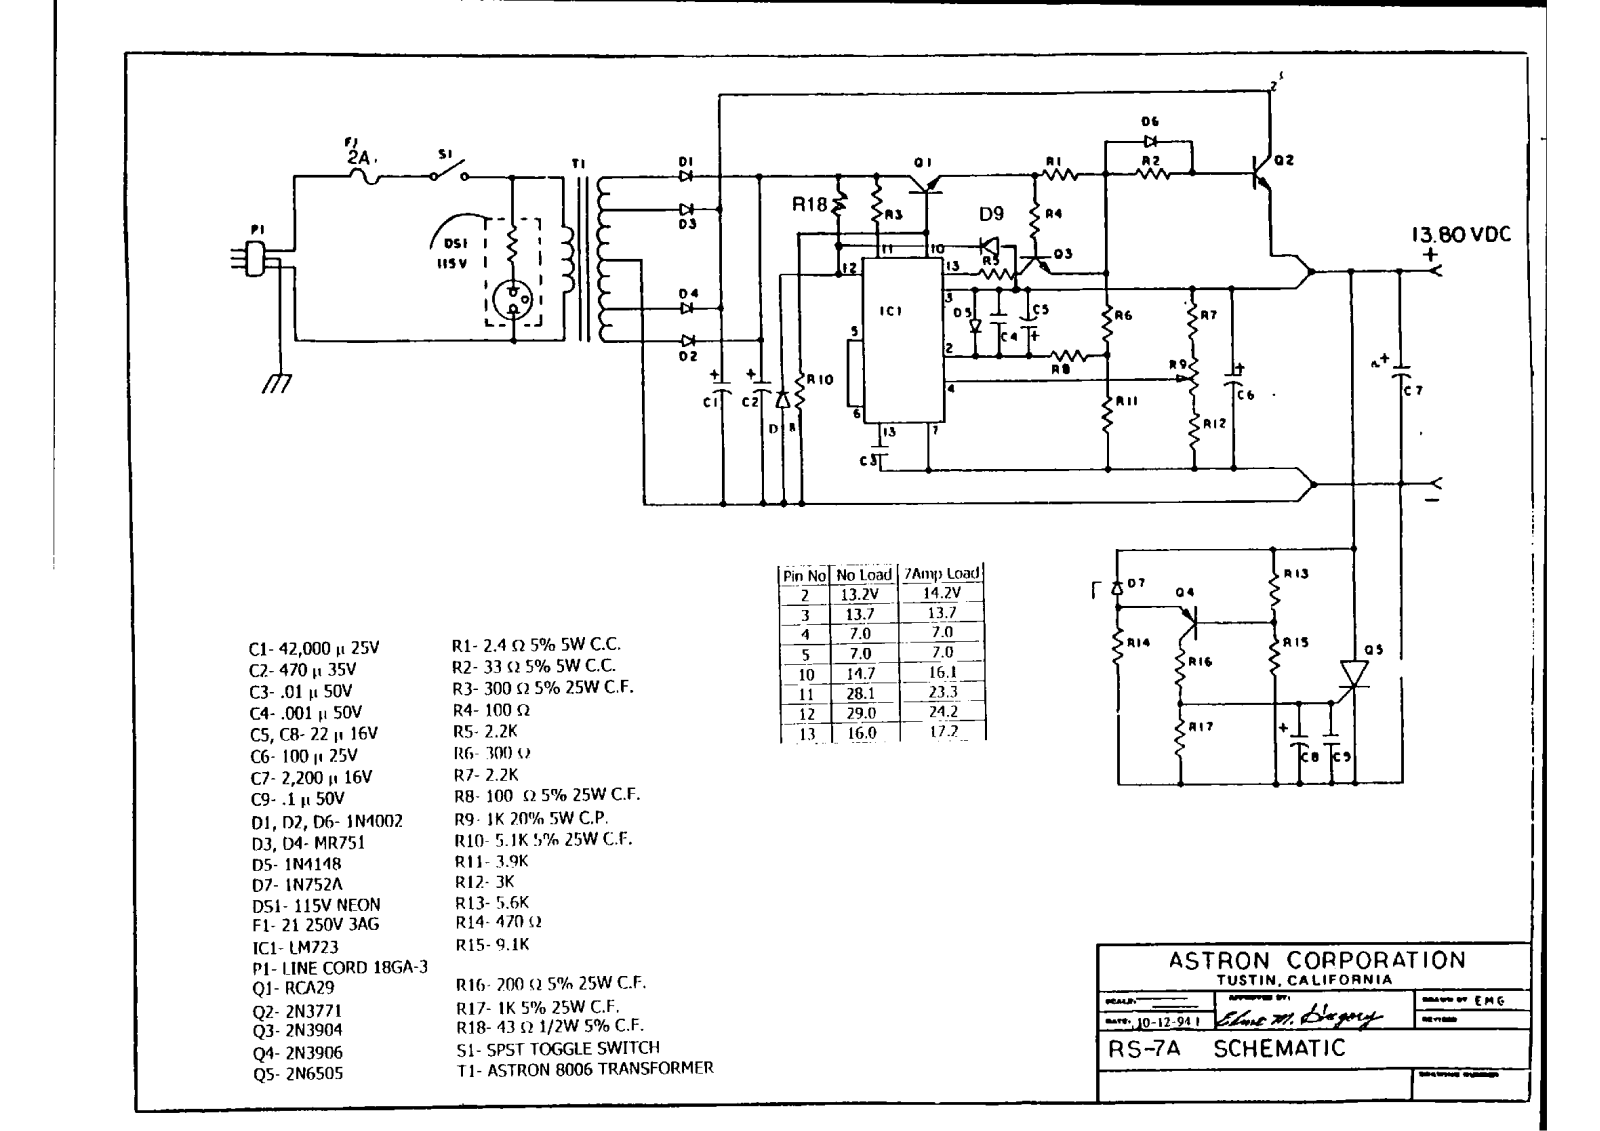 Astron rs 7a schematic